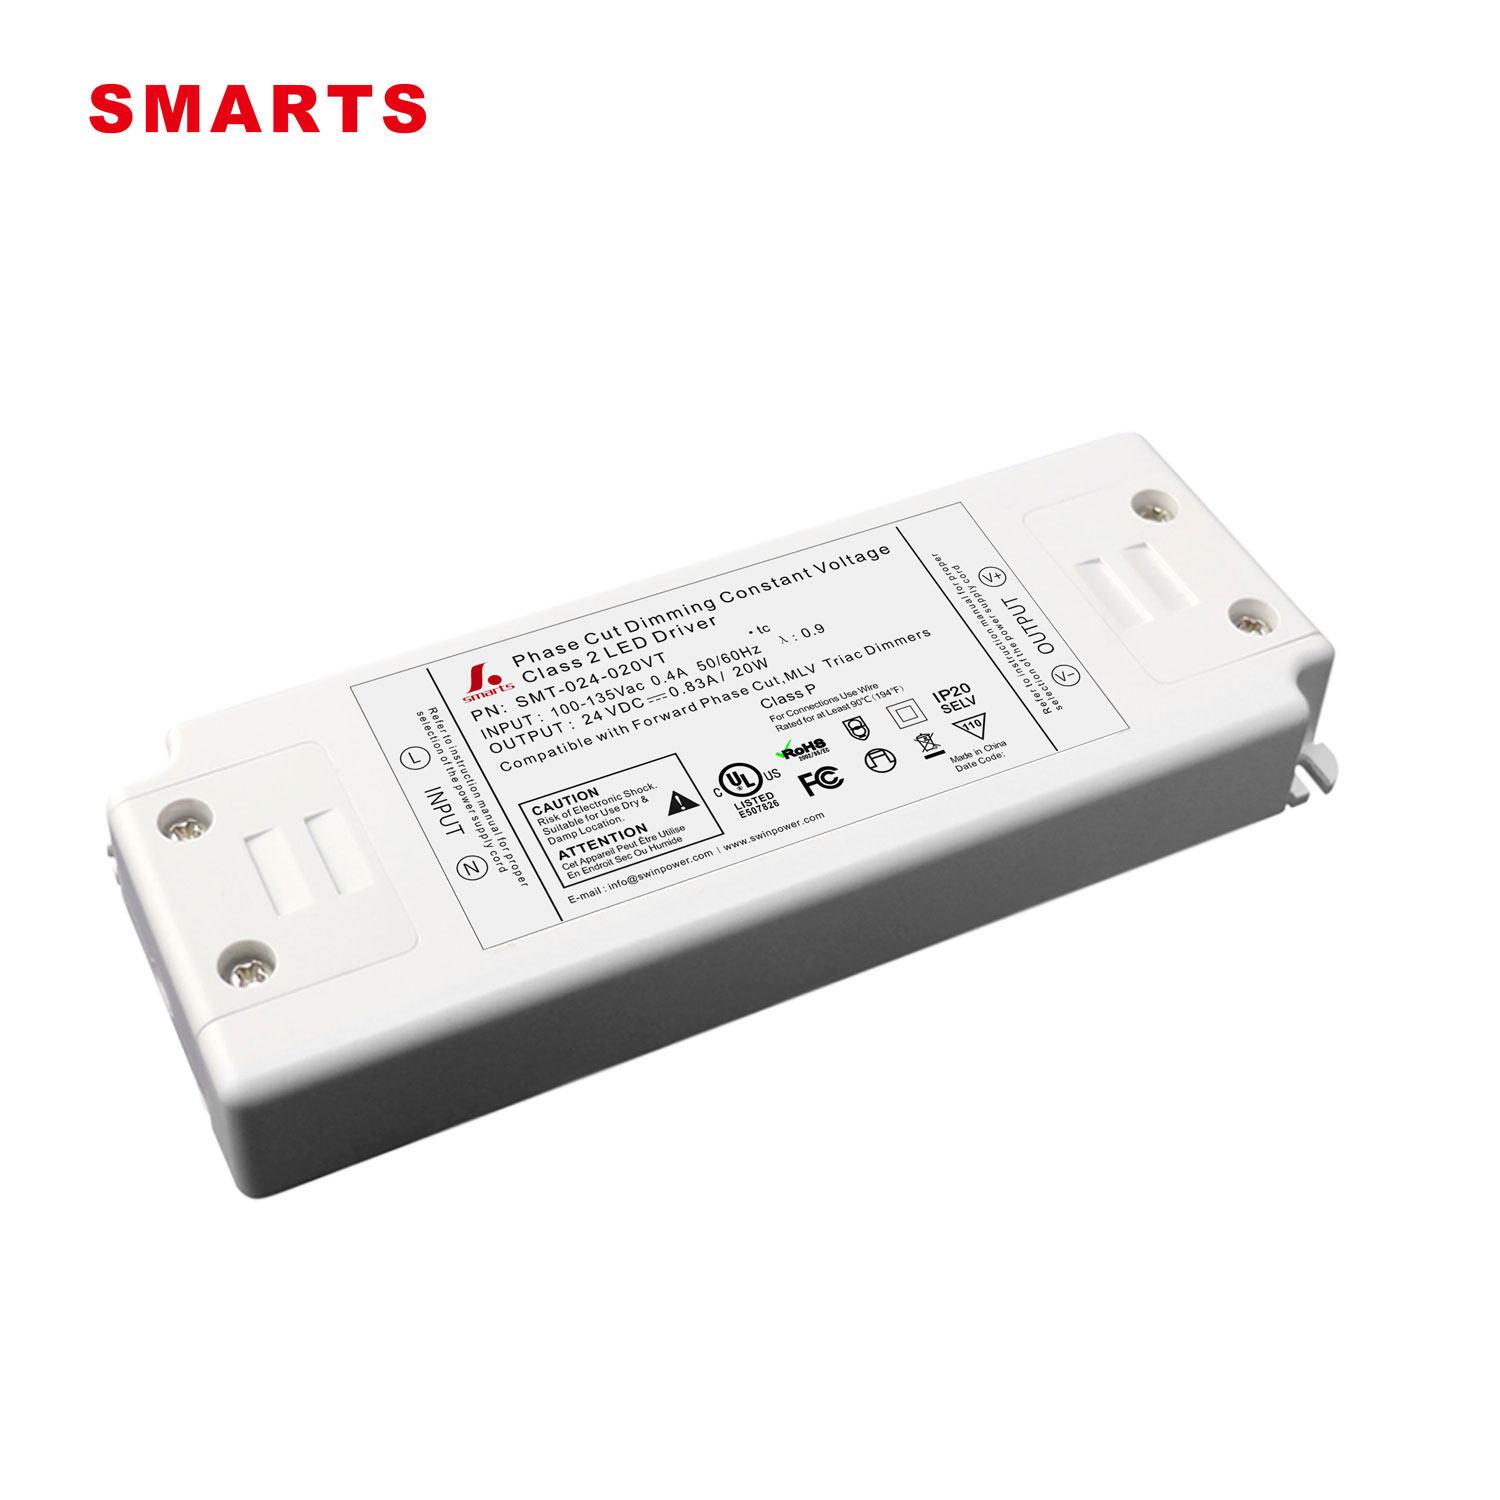 24v 20w class dimmable led driver